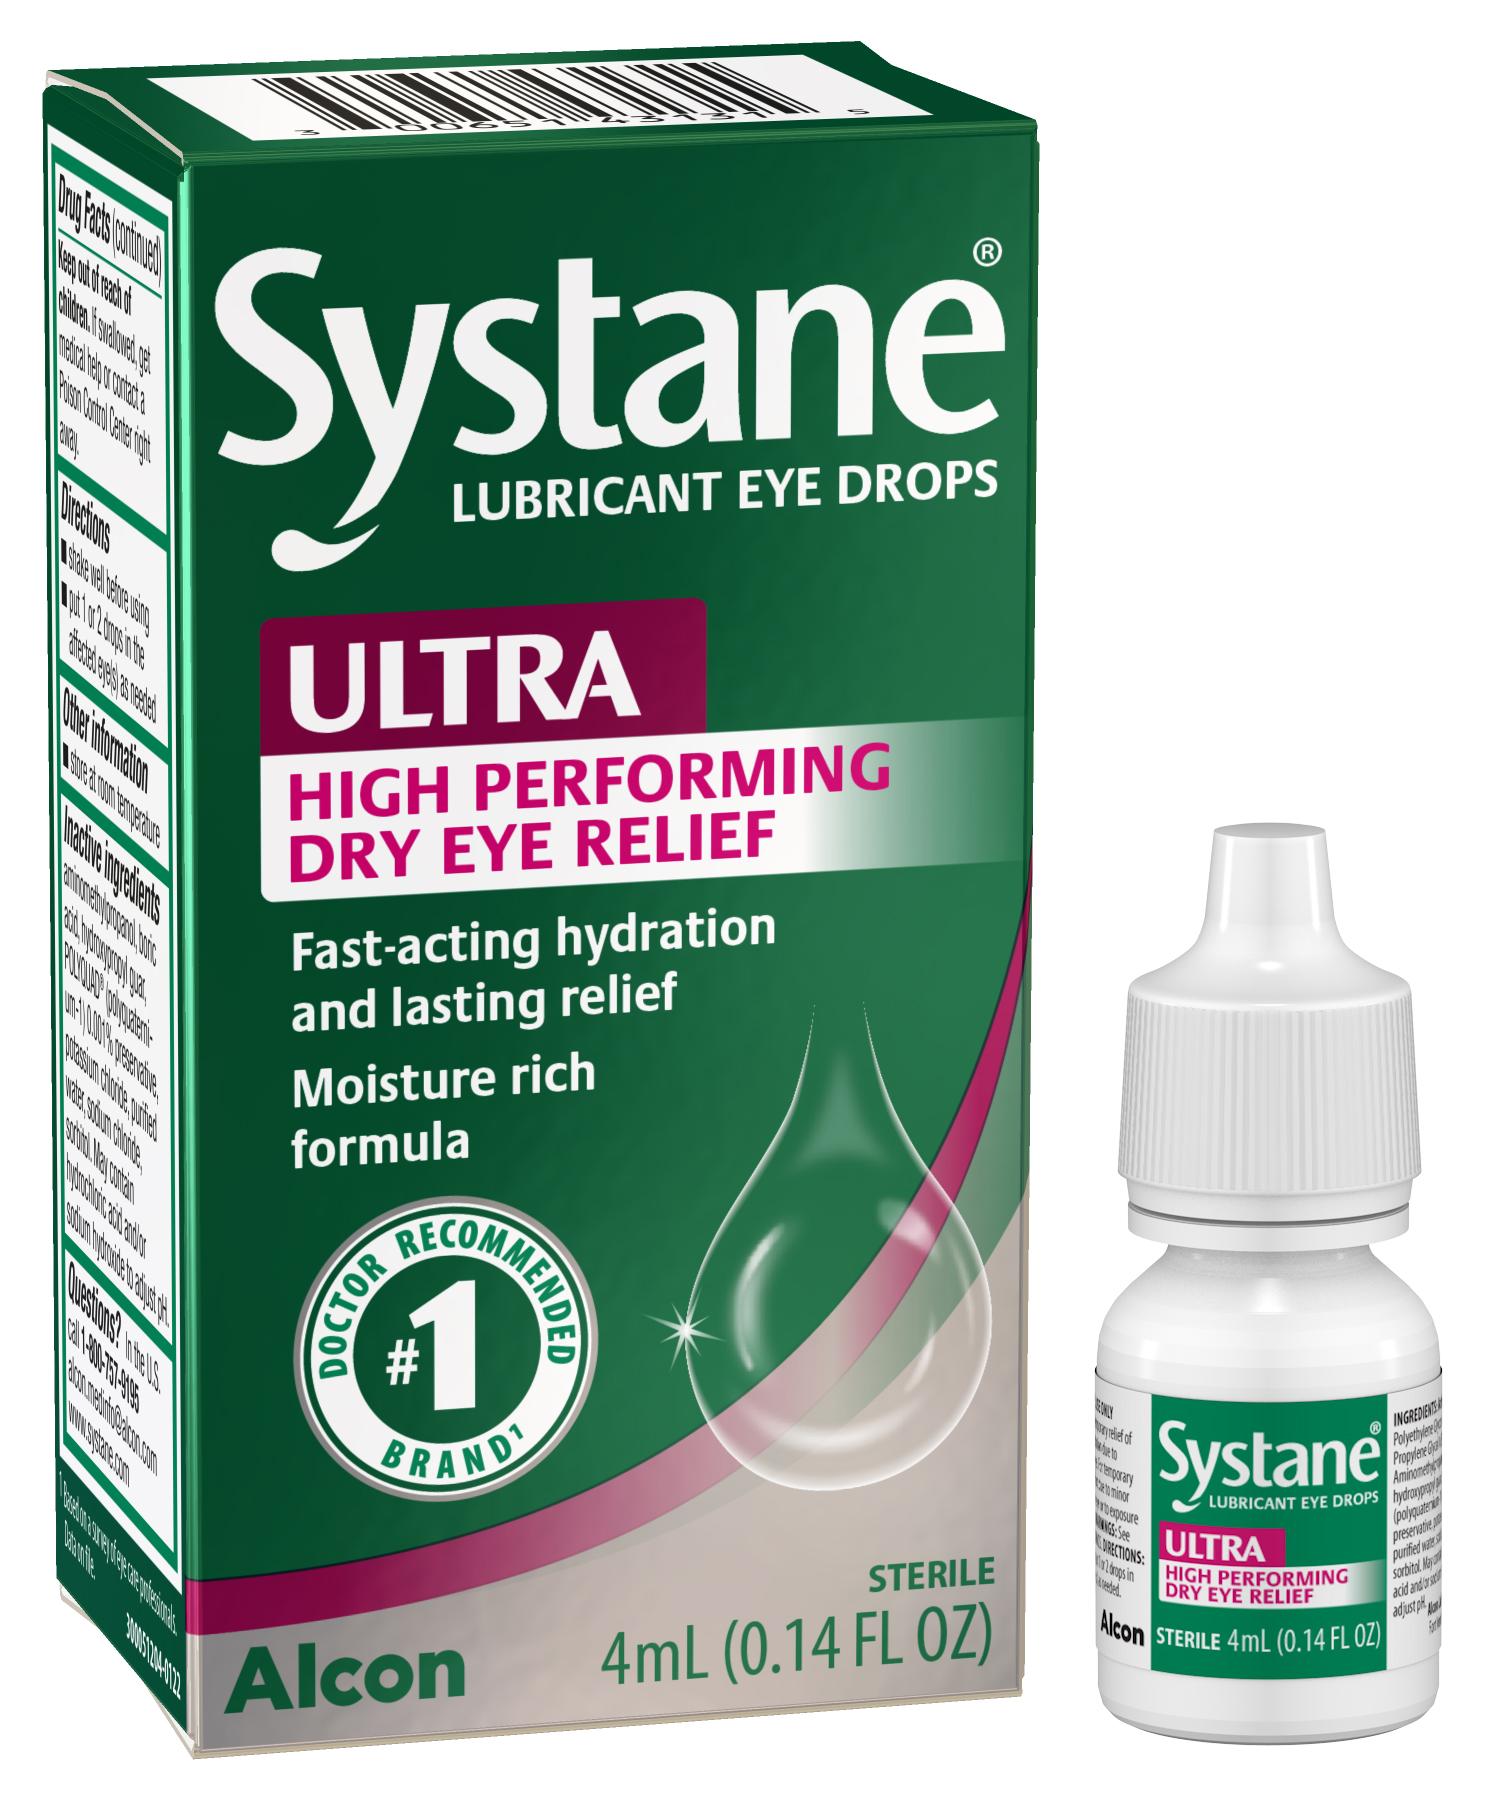 SYSTANE ULTRA Lubricant Eye Drops for Dry Eye Symptoms, 4mL - image 1 of 7